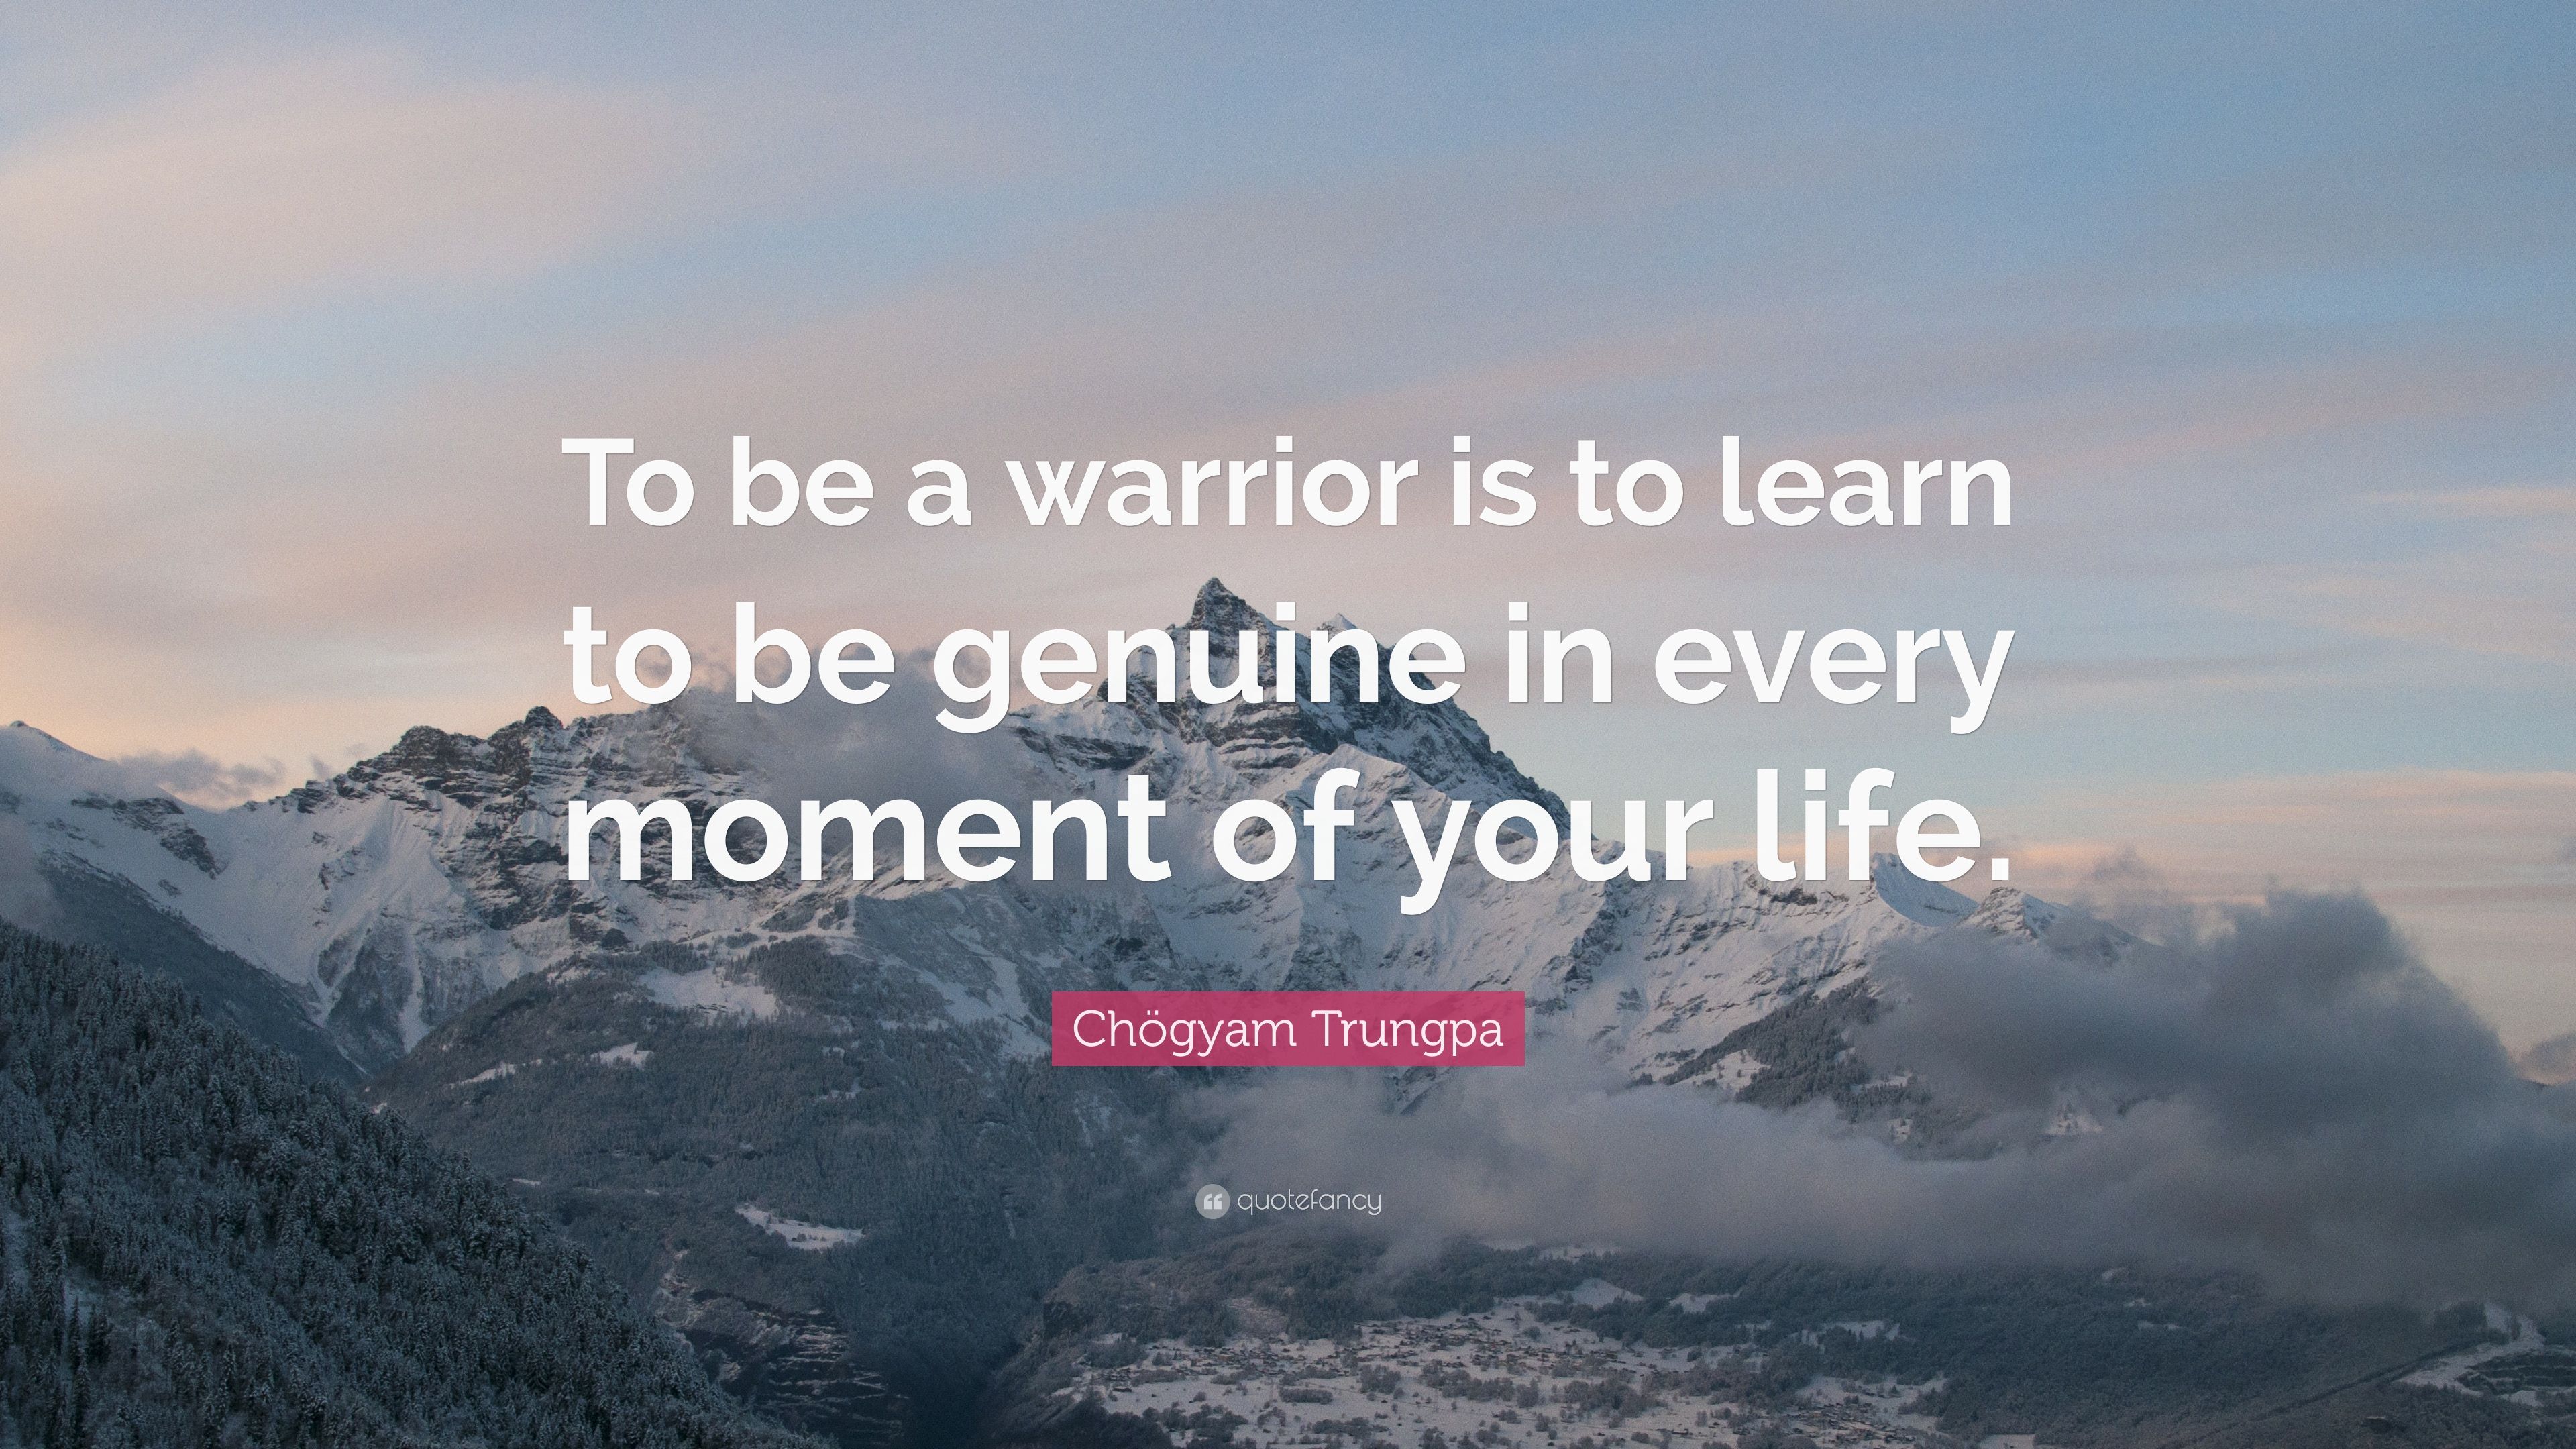 Chögyam Trungpa Quote: “To be a warrior is to learn to be genuine in every moment of your life.” (9 wallpaper)